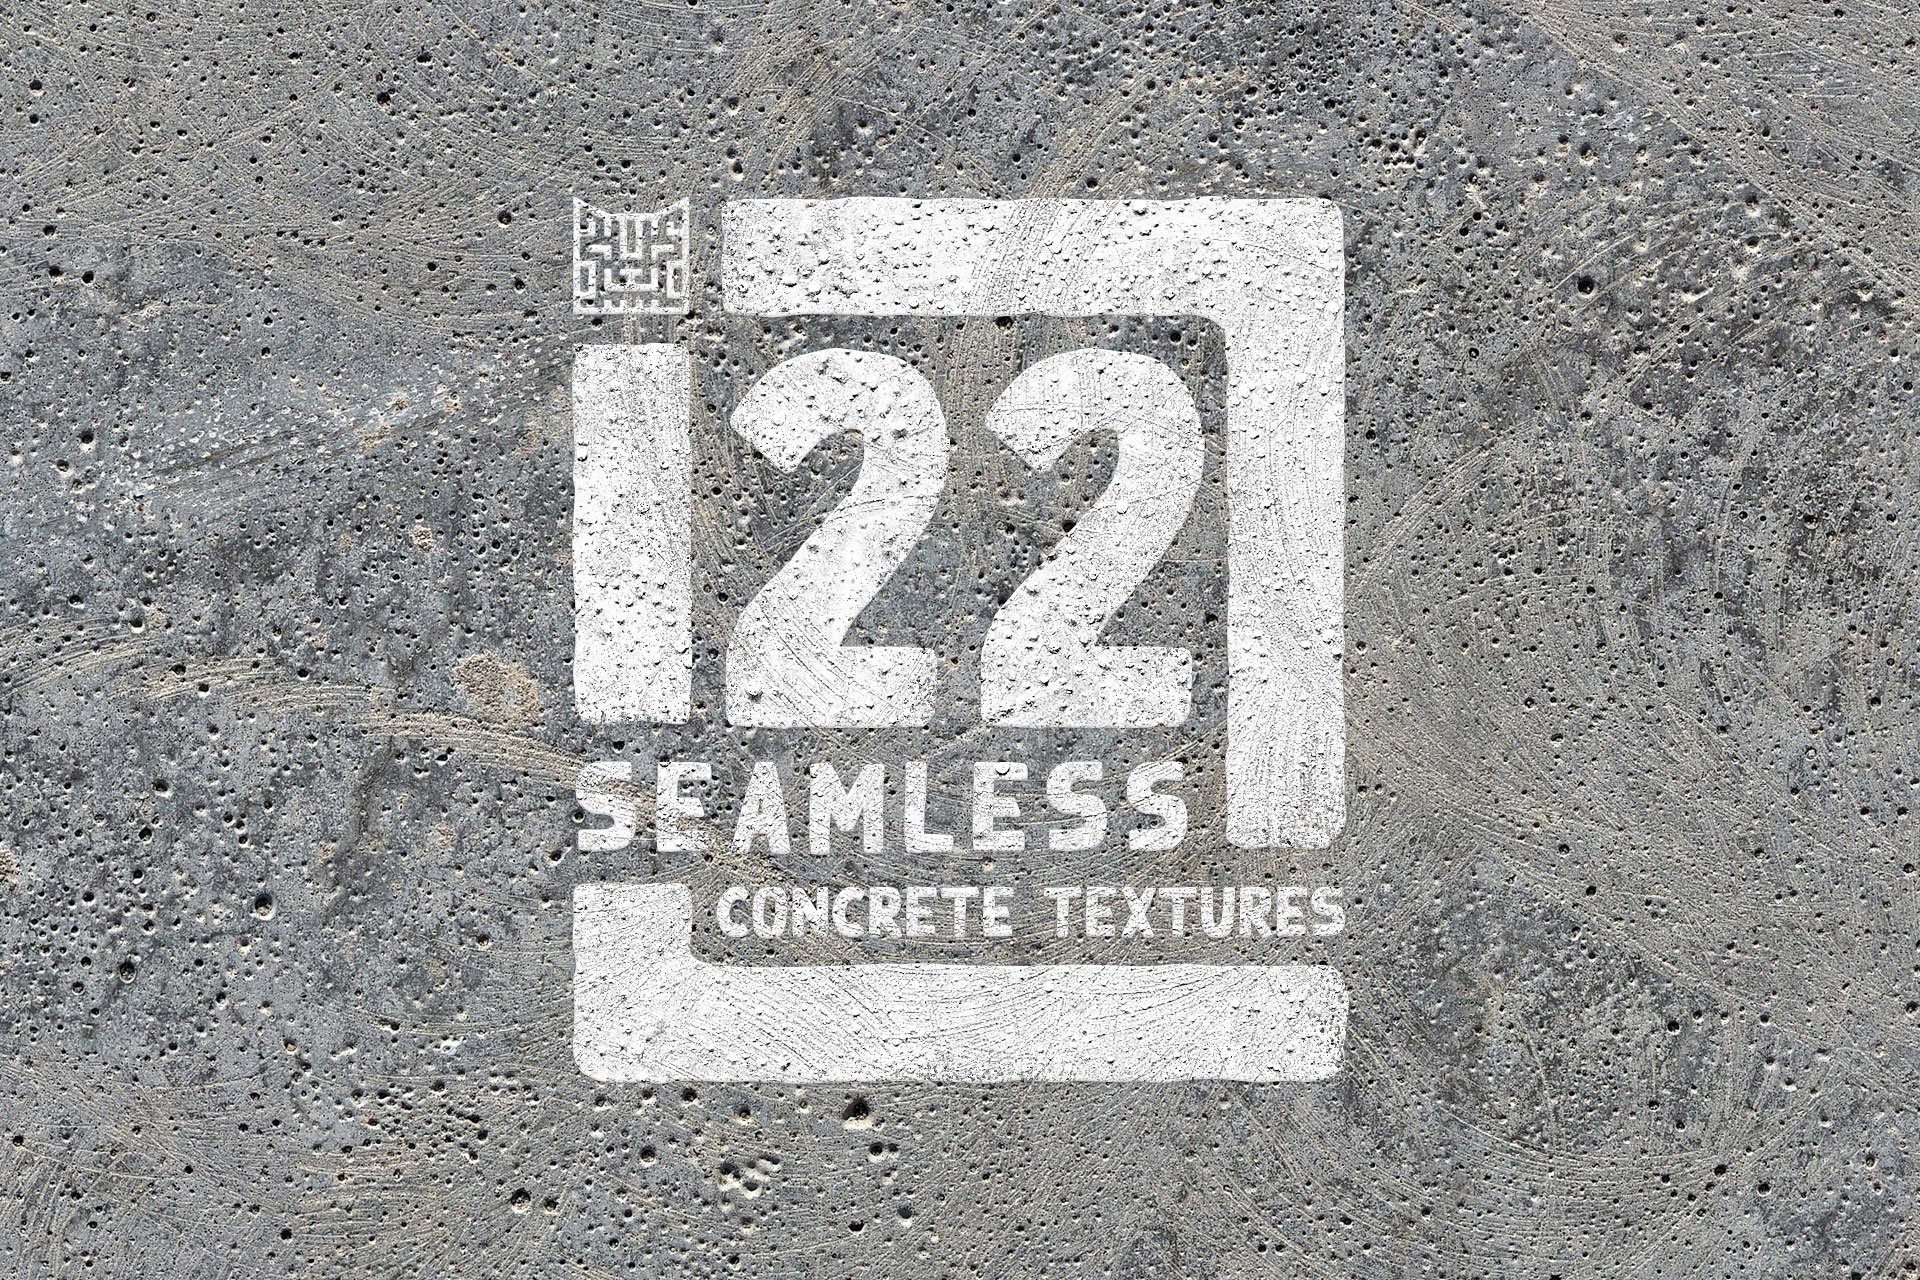 22 Seamless Concrete Textures cover image.